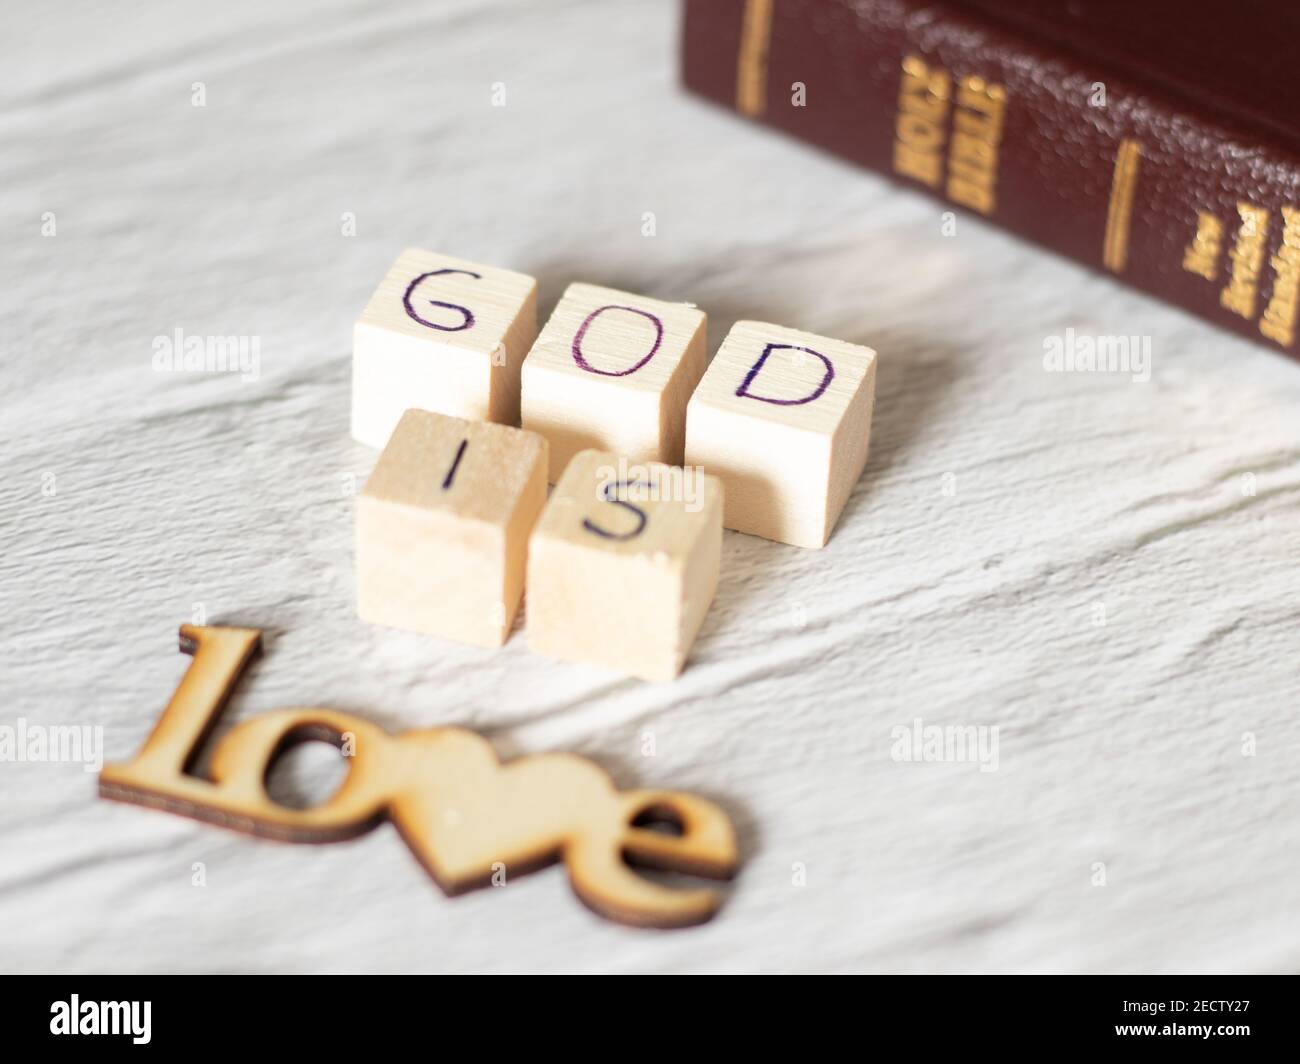 God is Love. Wooden text and Holy Bible with gold letters. God the Father and Jesus Christ love us all. Salvation, forgiveness, redemption, faith. Stock Photo